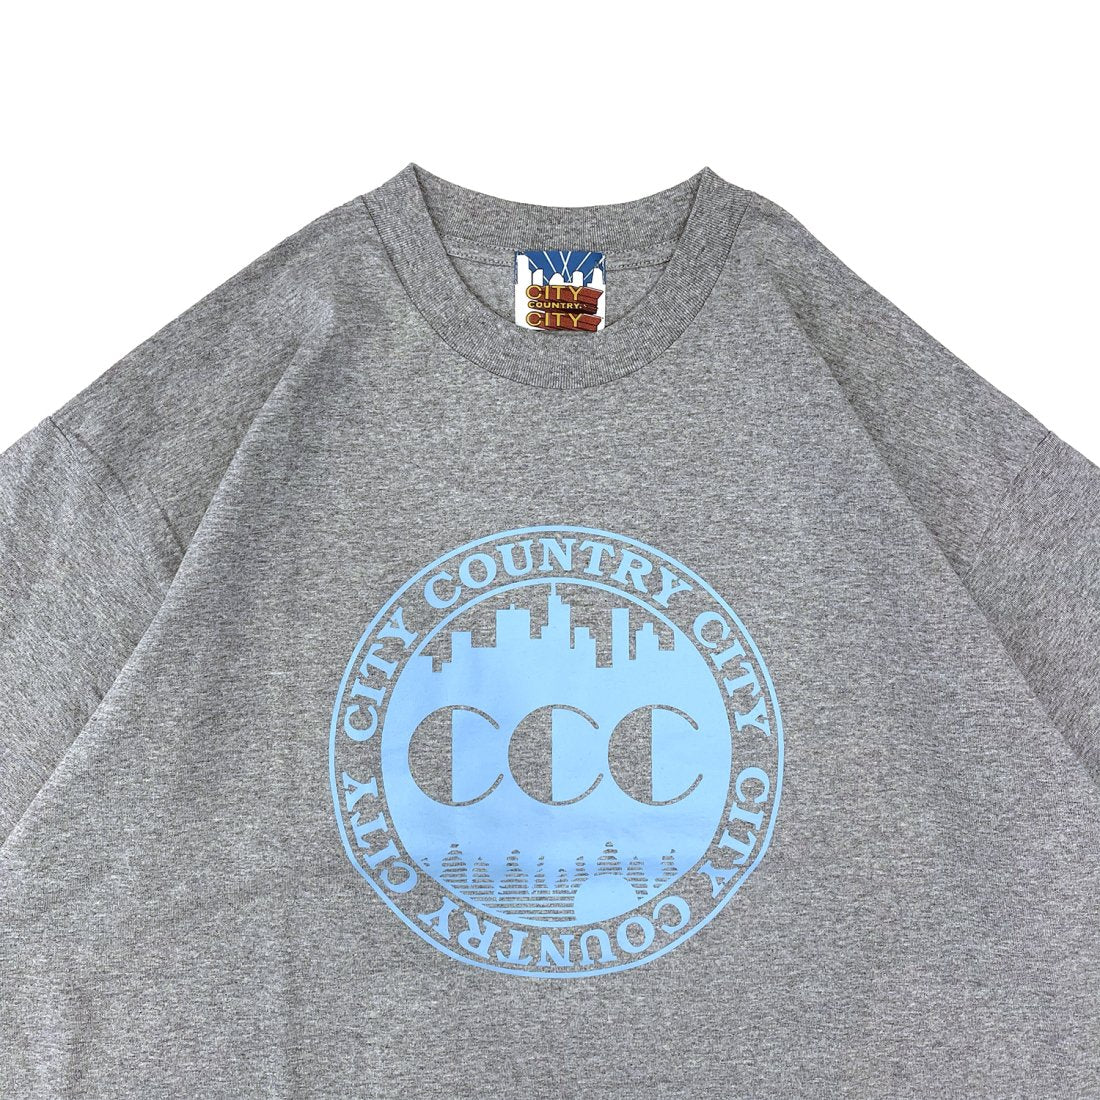 CITY COUNTRY CITY / COTTON T-SHIRT CCC